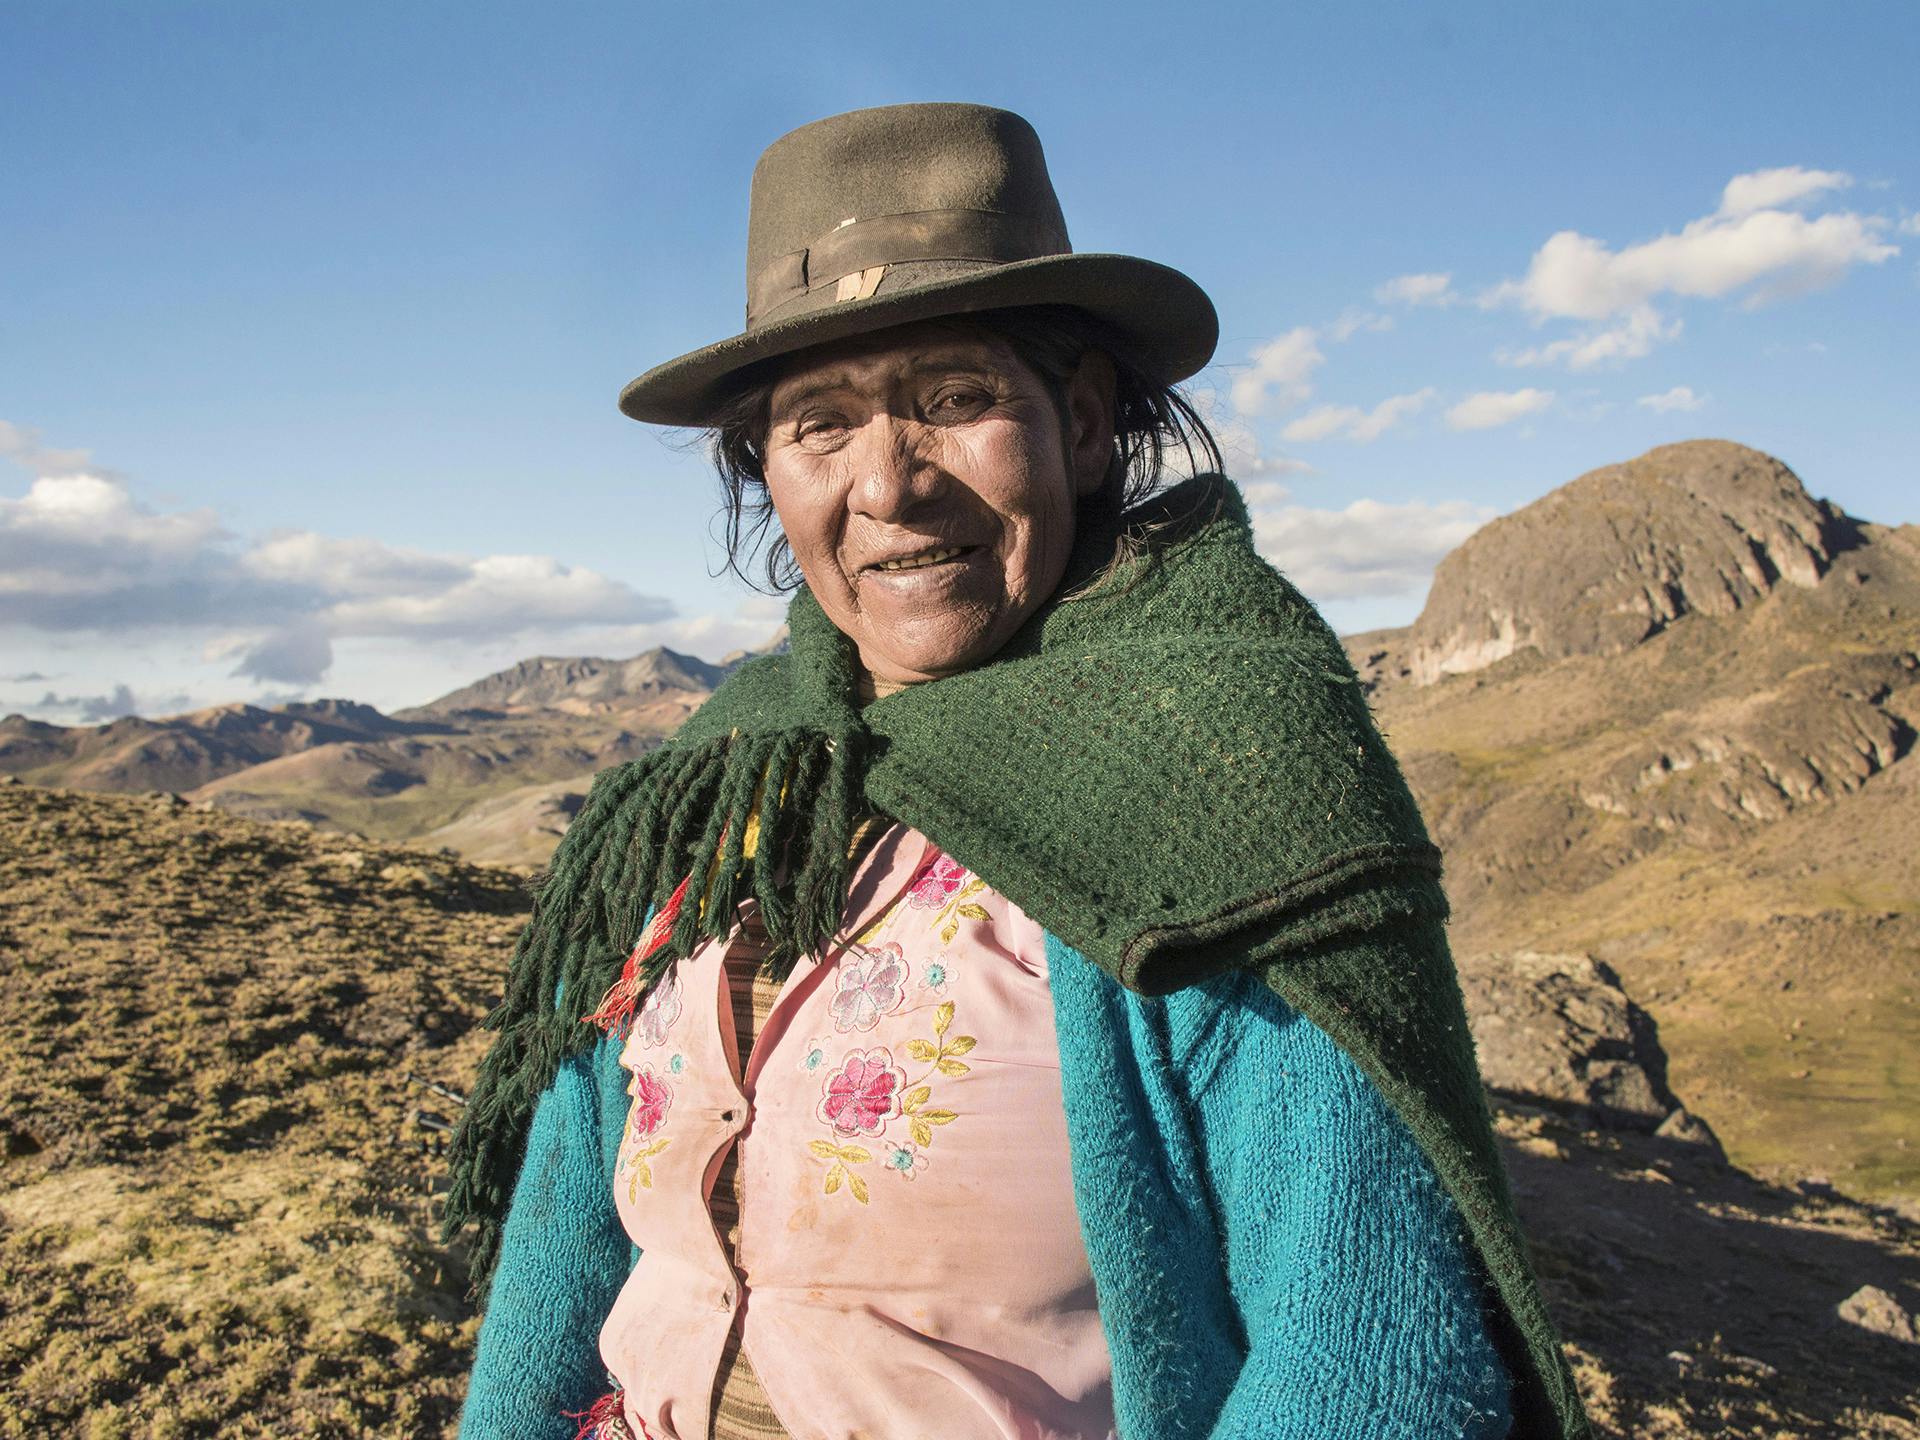 A Peruvian older woman wearing a hat and a knitted scarf.